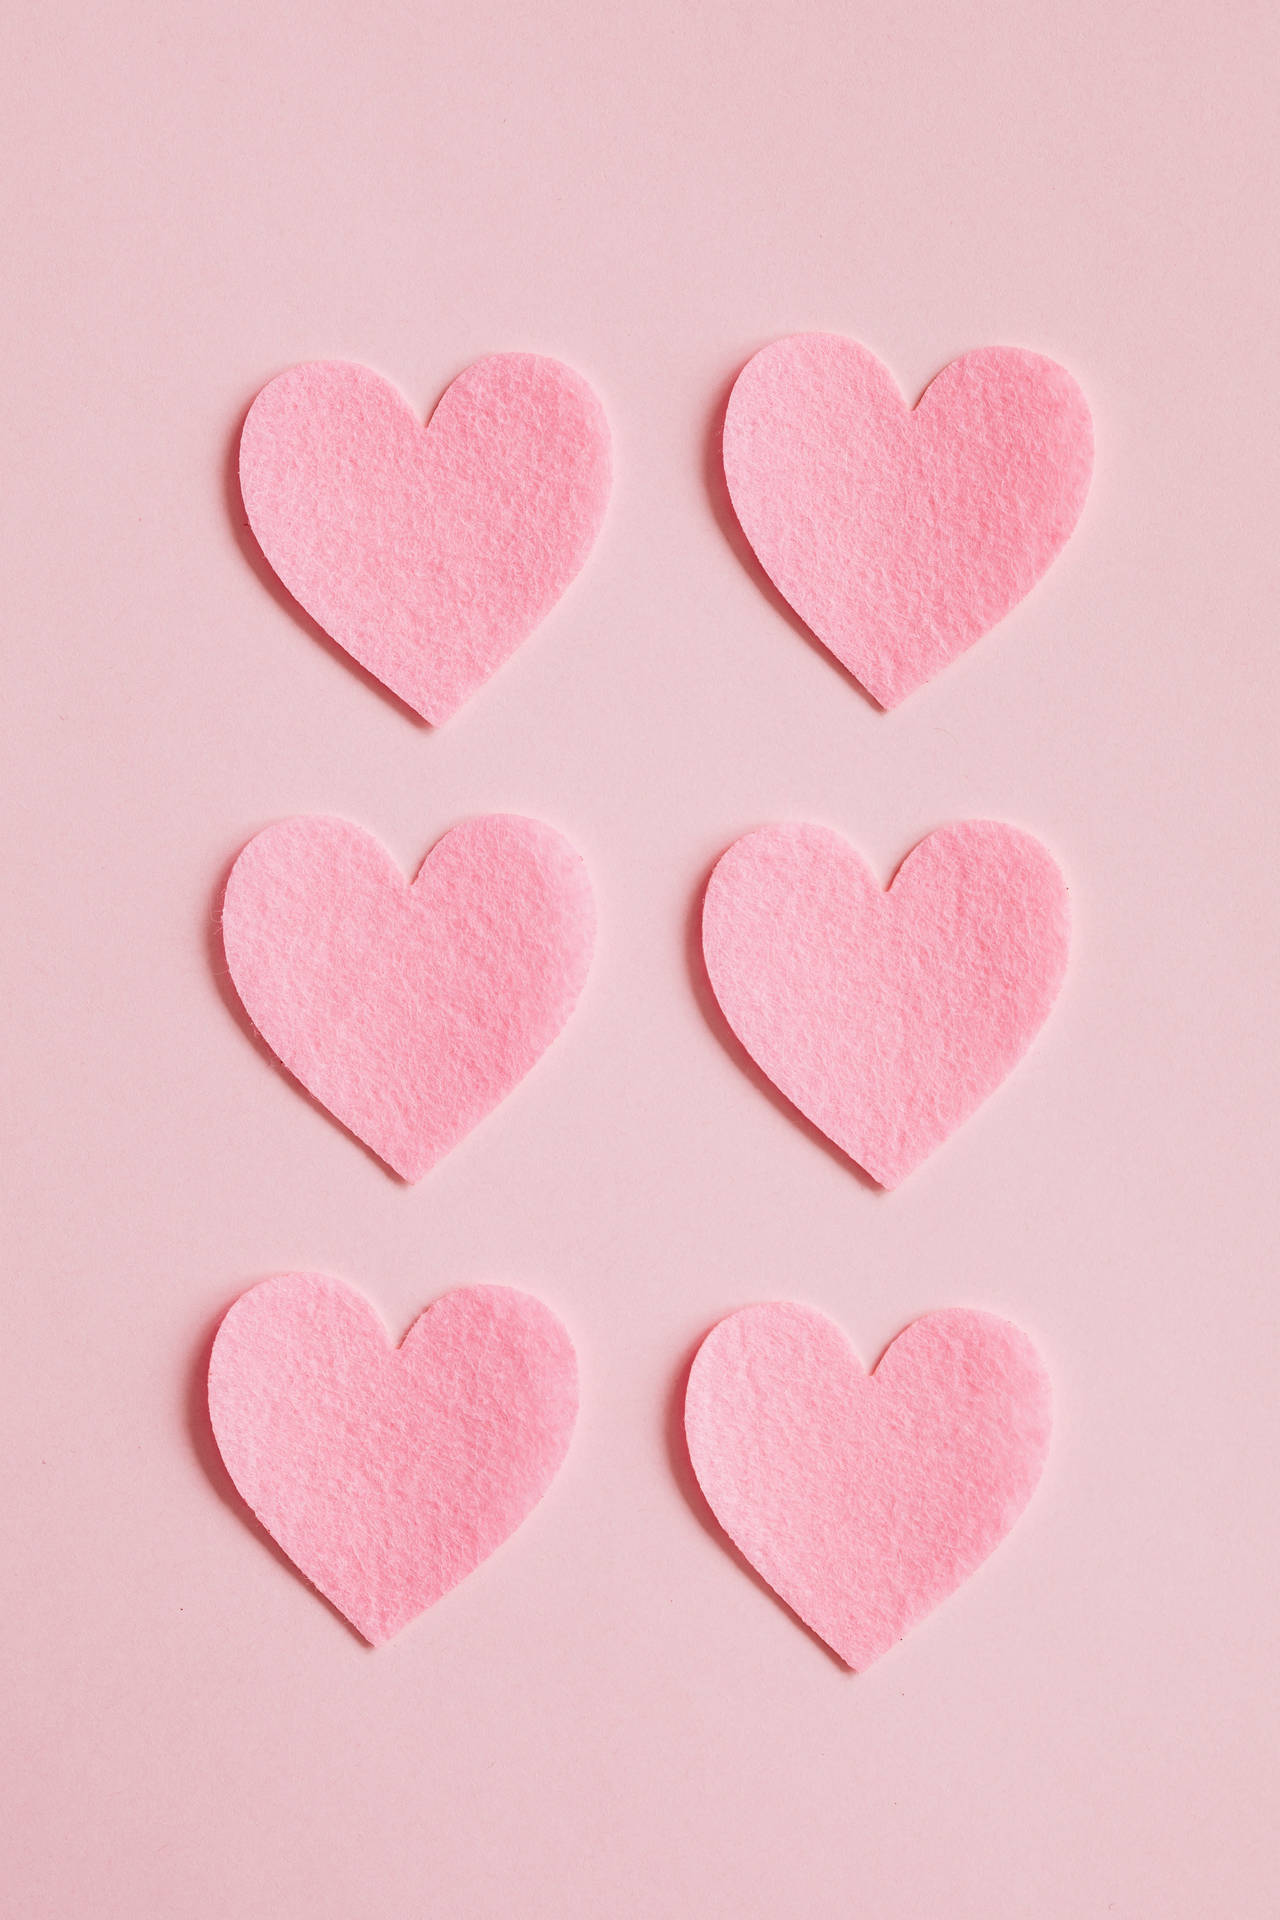 Cute Pastel Aesthetic Heart Cutouts Background